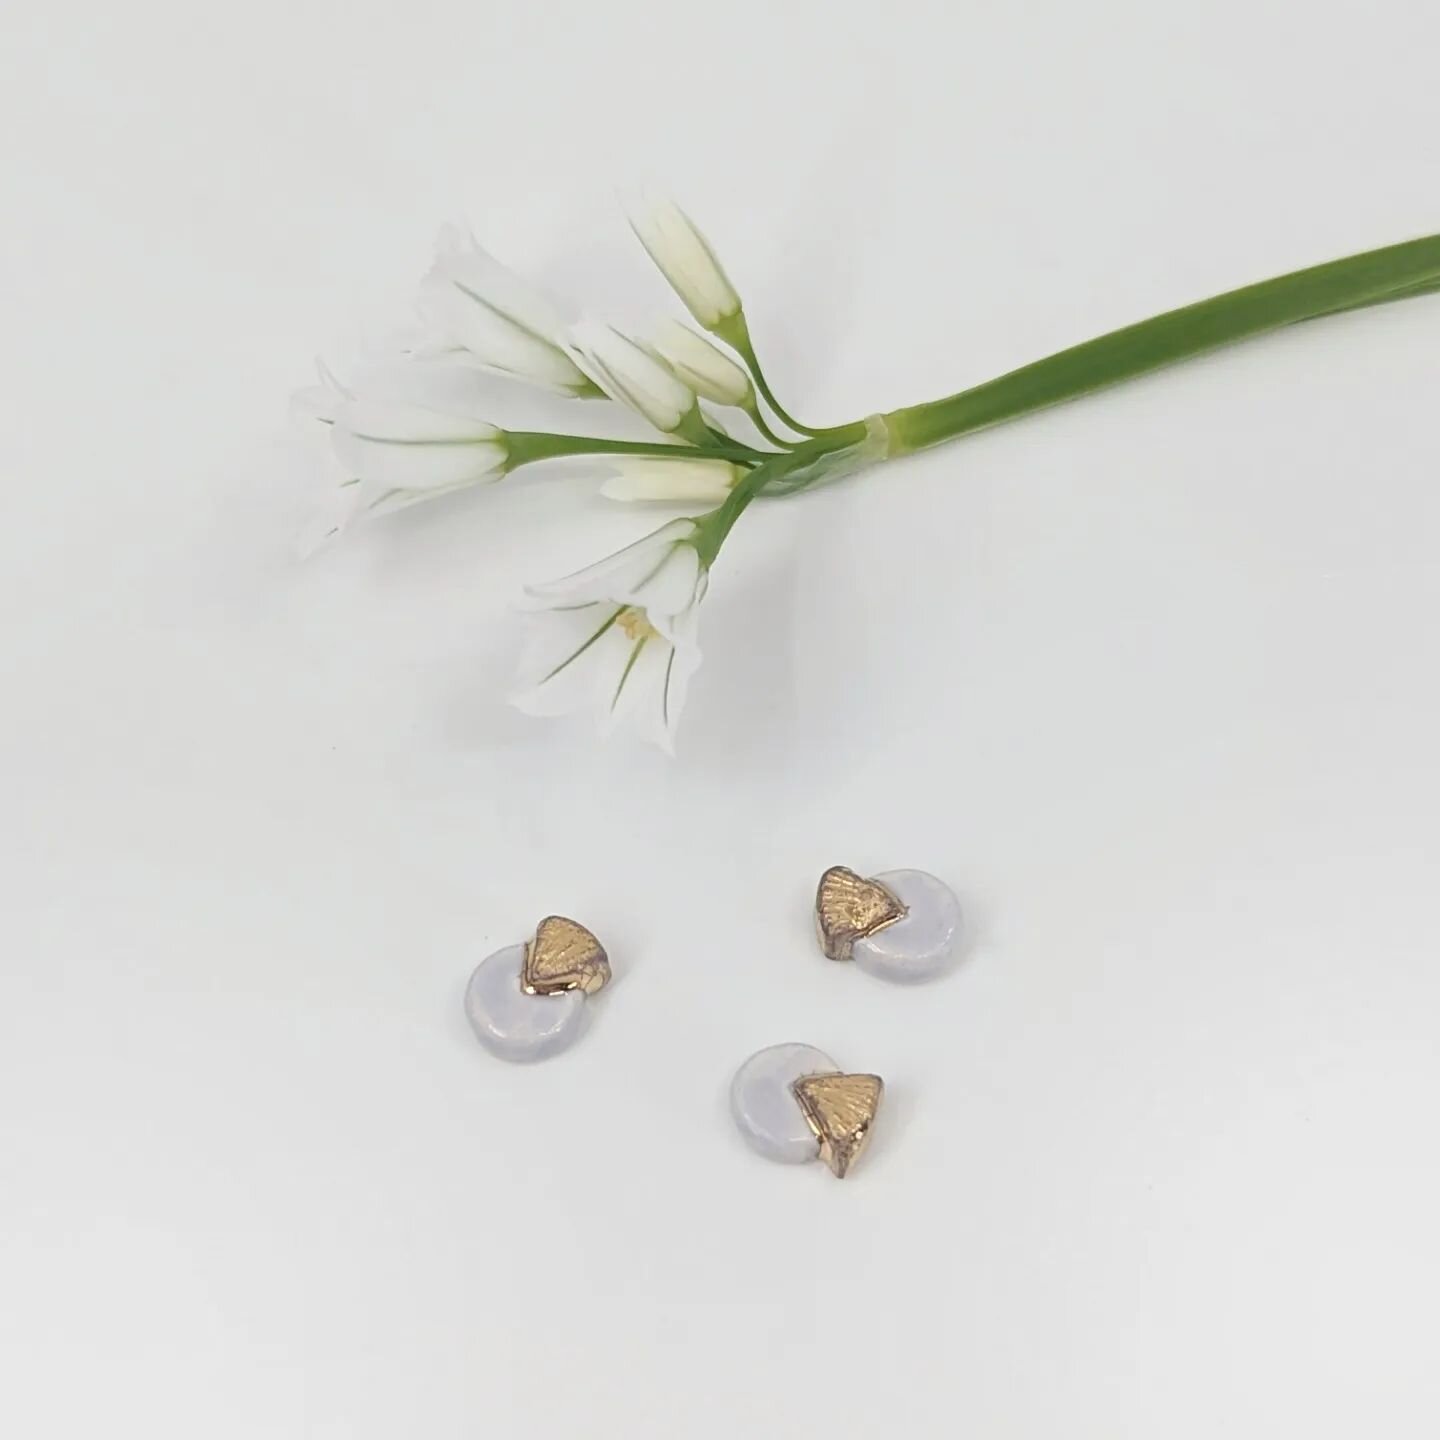 💜🐰New for SPRING 🌞💚 We are happy to share the new Deco Collection with y'all finally! These mauve studs will be available soon. Each stud is hand sculpted from porcelain, kiln fired and mounted on 925 sterling silver posts.
.
.
.
#jewelry #handma